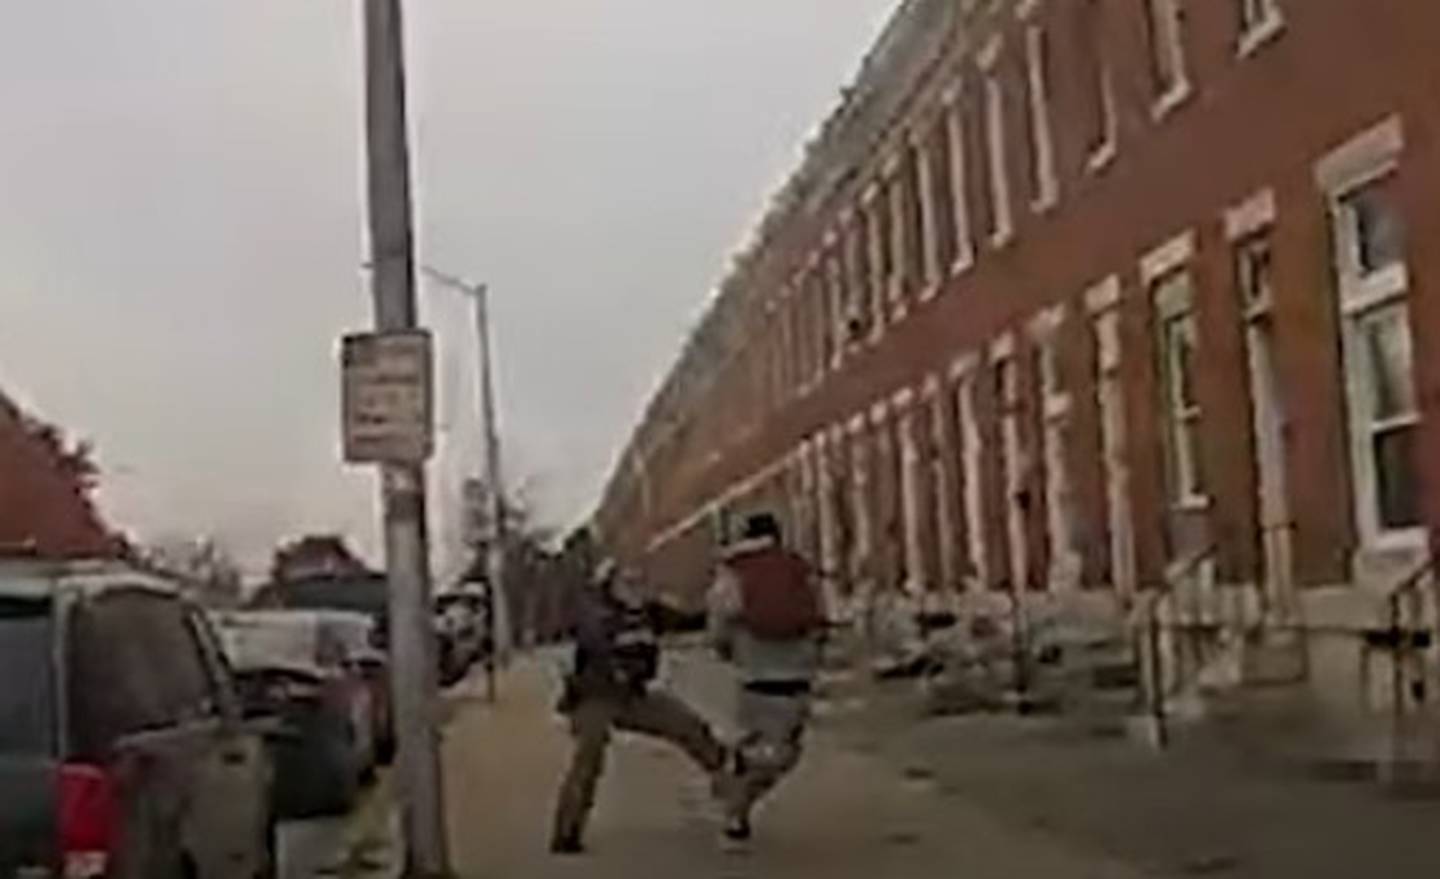 Baltimore Police Officer Brittany Routh attempts to tackle 27-year-old Hunter Jessup during a foot chase on Nov. 7, 2023. Her body cam footage showed she was slightly ahead of him when she attempted to tackle him from the side as she exited the car she was riding in and bolted onto the sidewalk. Jessup dodged the tackle and was shot and killed by officers after firing at them a few seconds later.